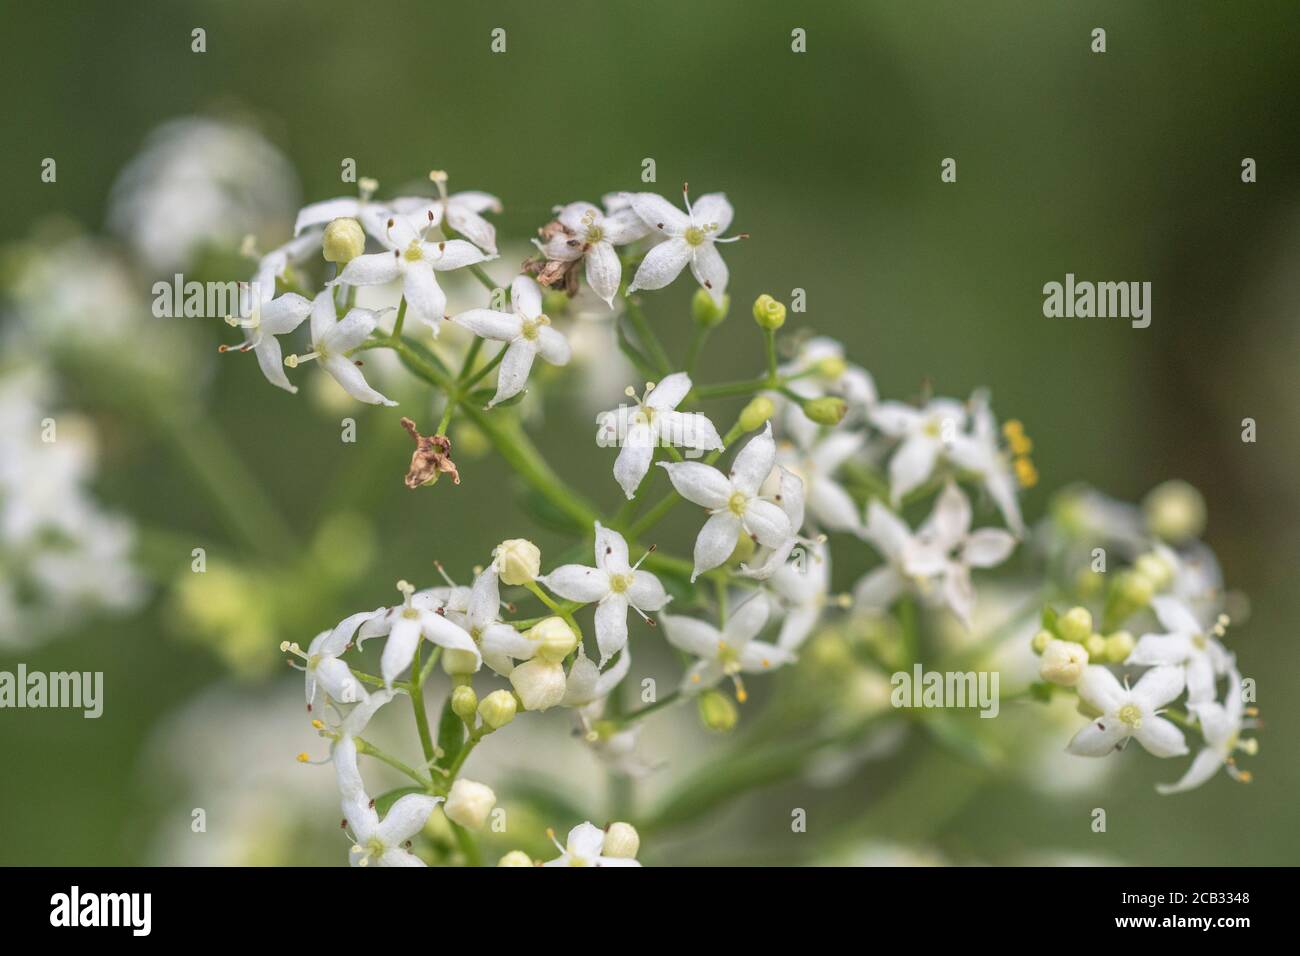 Tiny white flowers of Hedge Bedstraw / Galium mollugo a common hedgerow medicinal plant once used in herbal remedies. Related to Cleavers / G. aparine Stock Photo